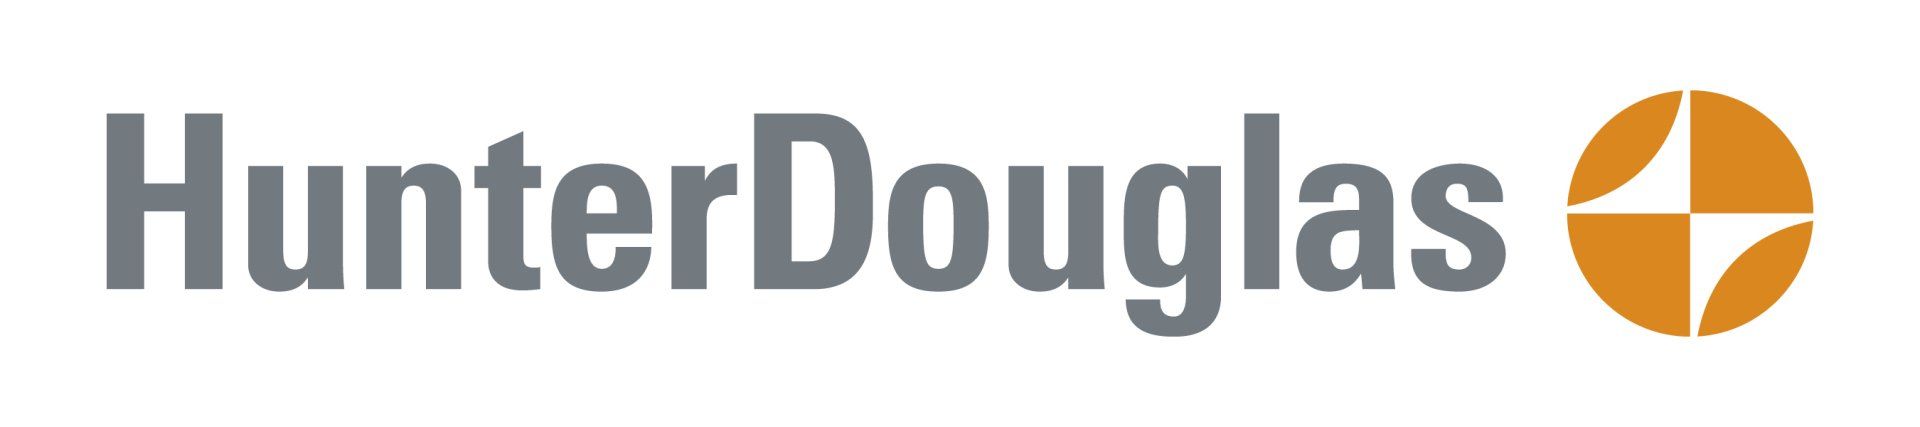 A logo for hunter douglas is shown on a white background.